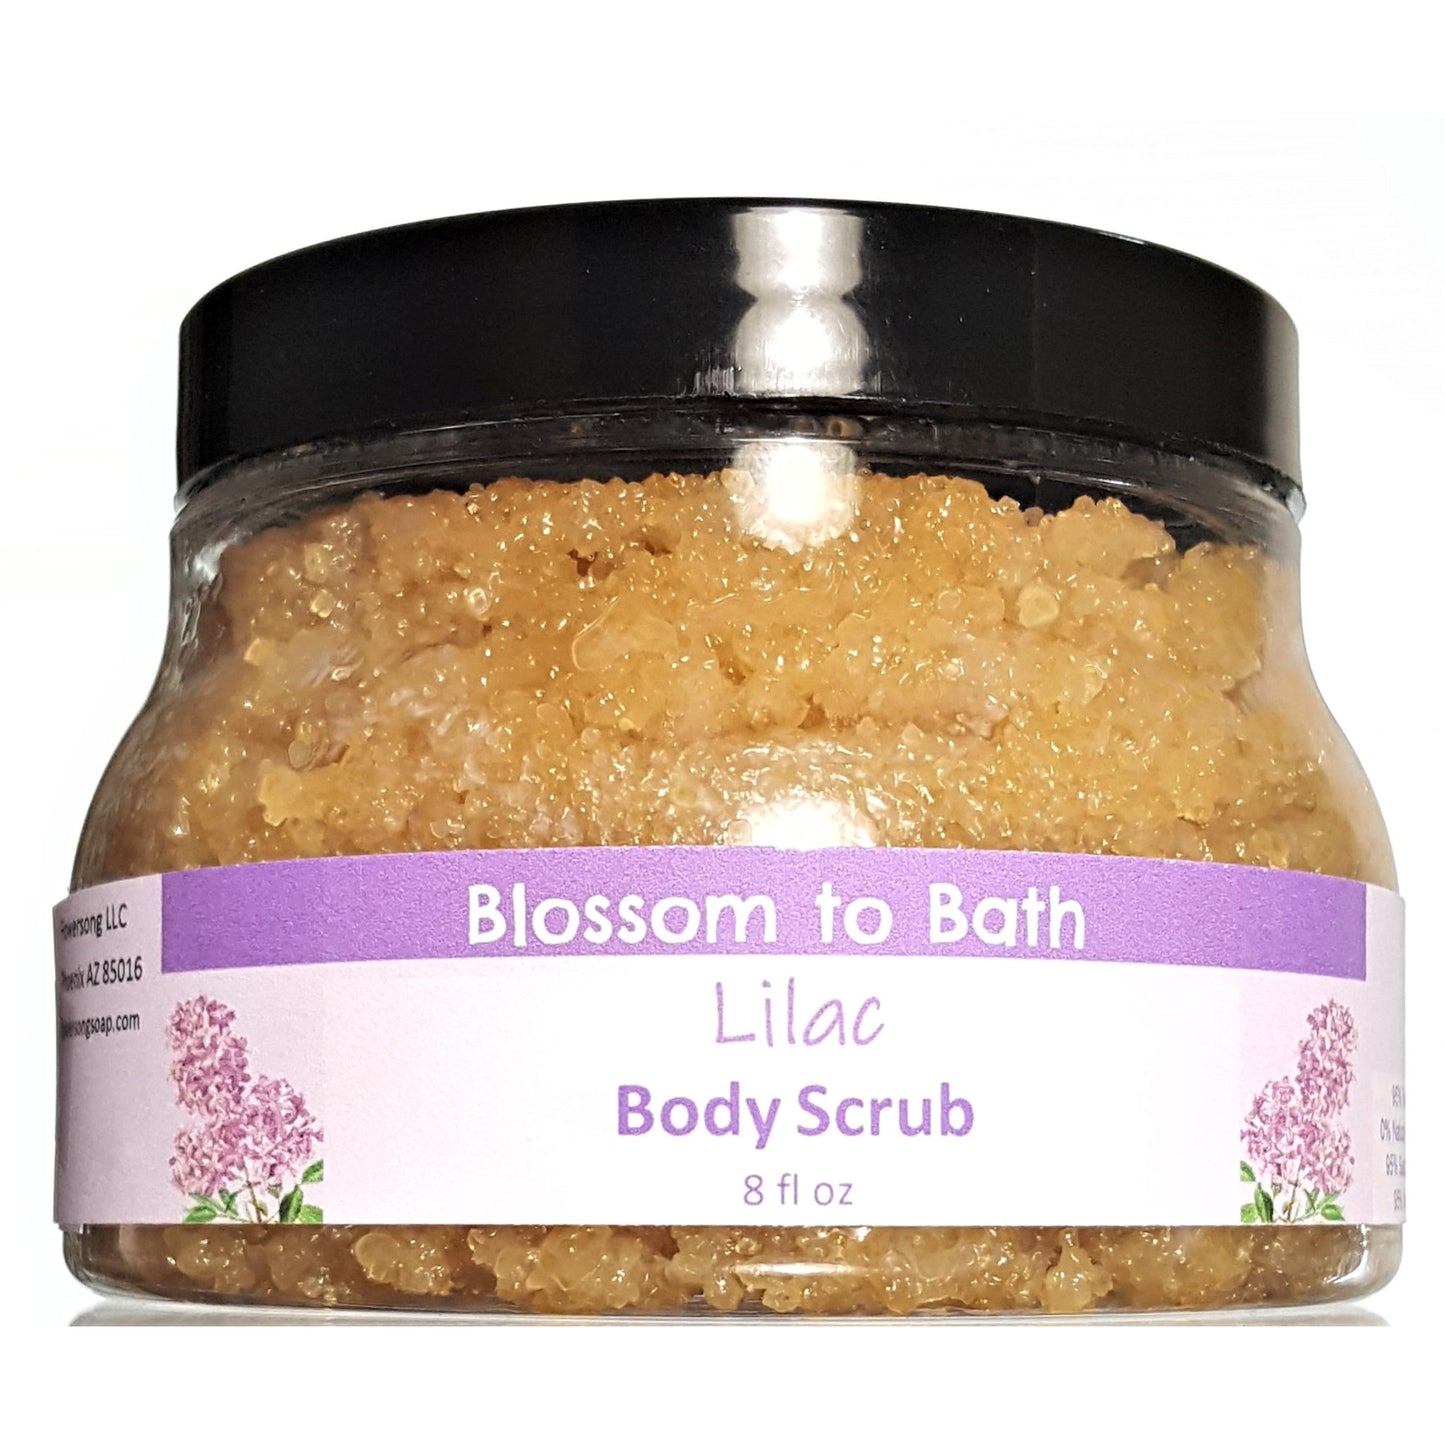 Buy Blossom to Bath Lilac Body Scrub from Flowersong Soap Studio.  Large crystal turbinado sugar plus  rich oils conveniently exfoliate and moisturize in one step  The scent of a freshly blooming lilac bush, the embodiment of spring flowers.